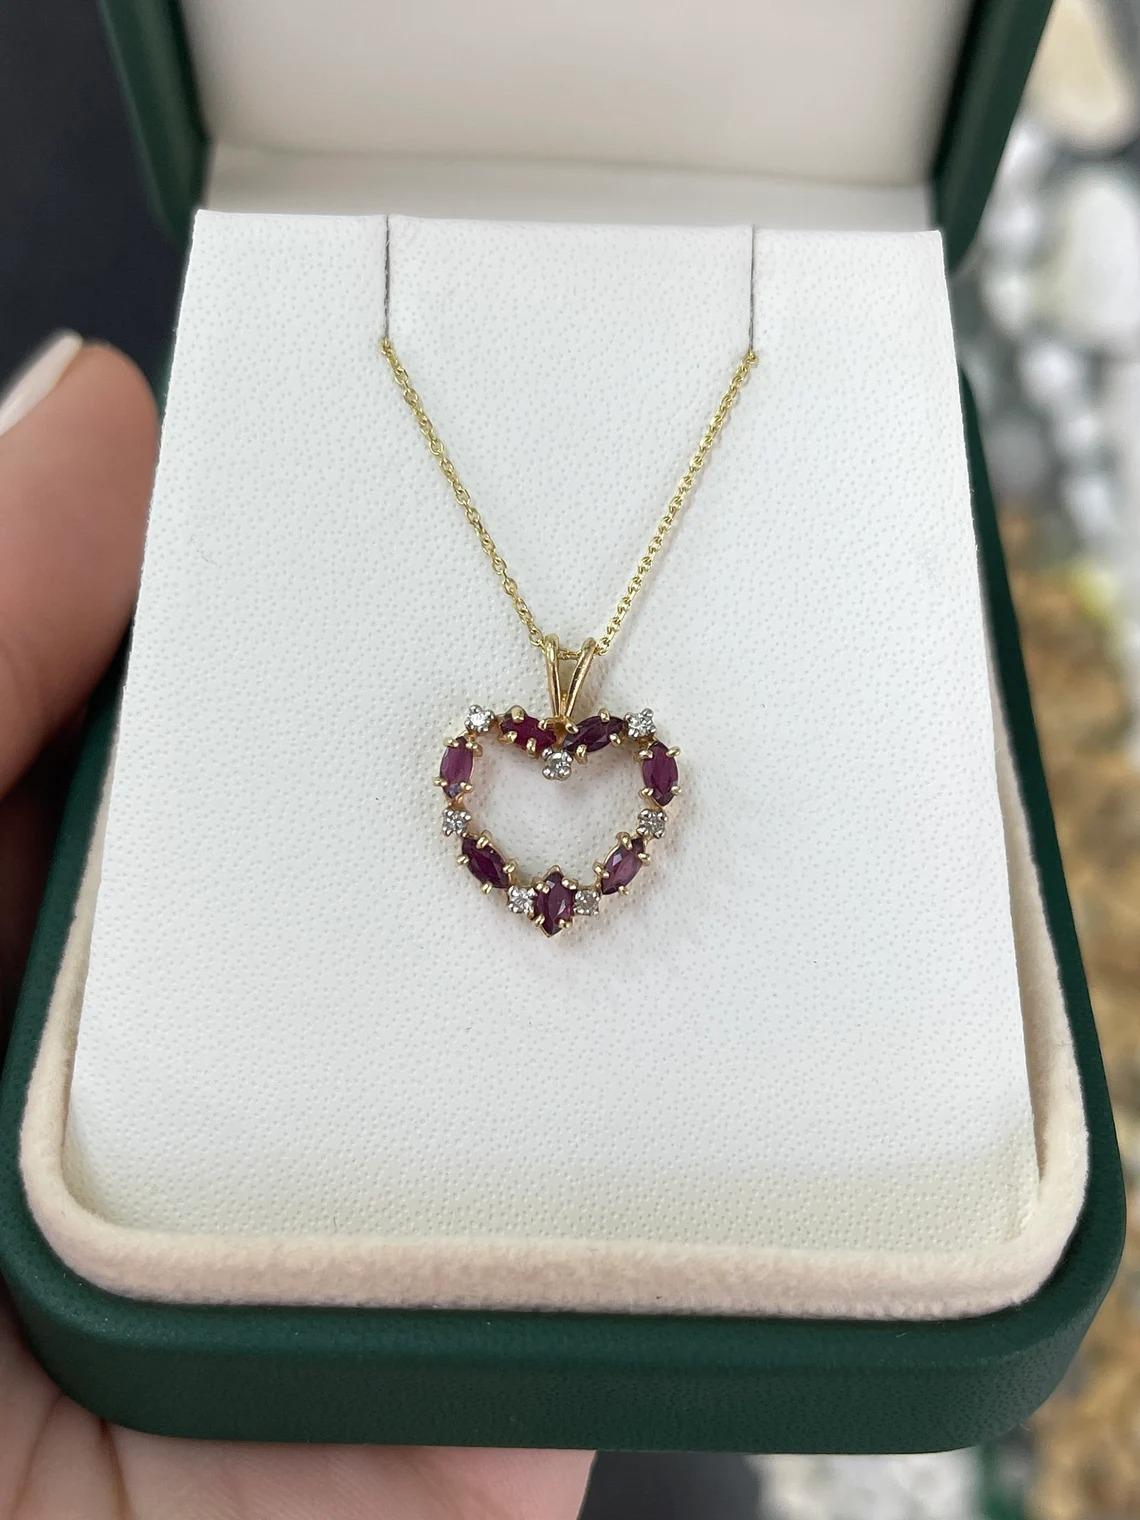 A gorgeous ruby and diamond heart necklace. This charming piece features seven beautiful marquise cut rubies with very good characteristics such as color, clarity, and luster. Between each ruby are micro brilliant round cut diamonds creating the